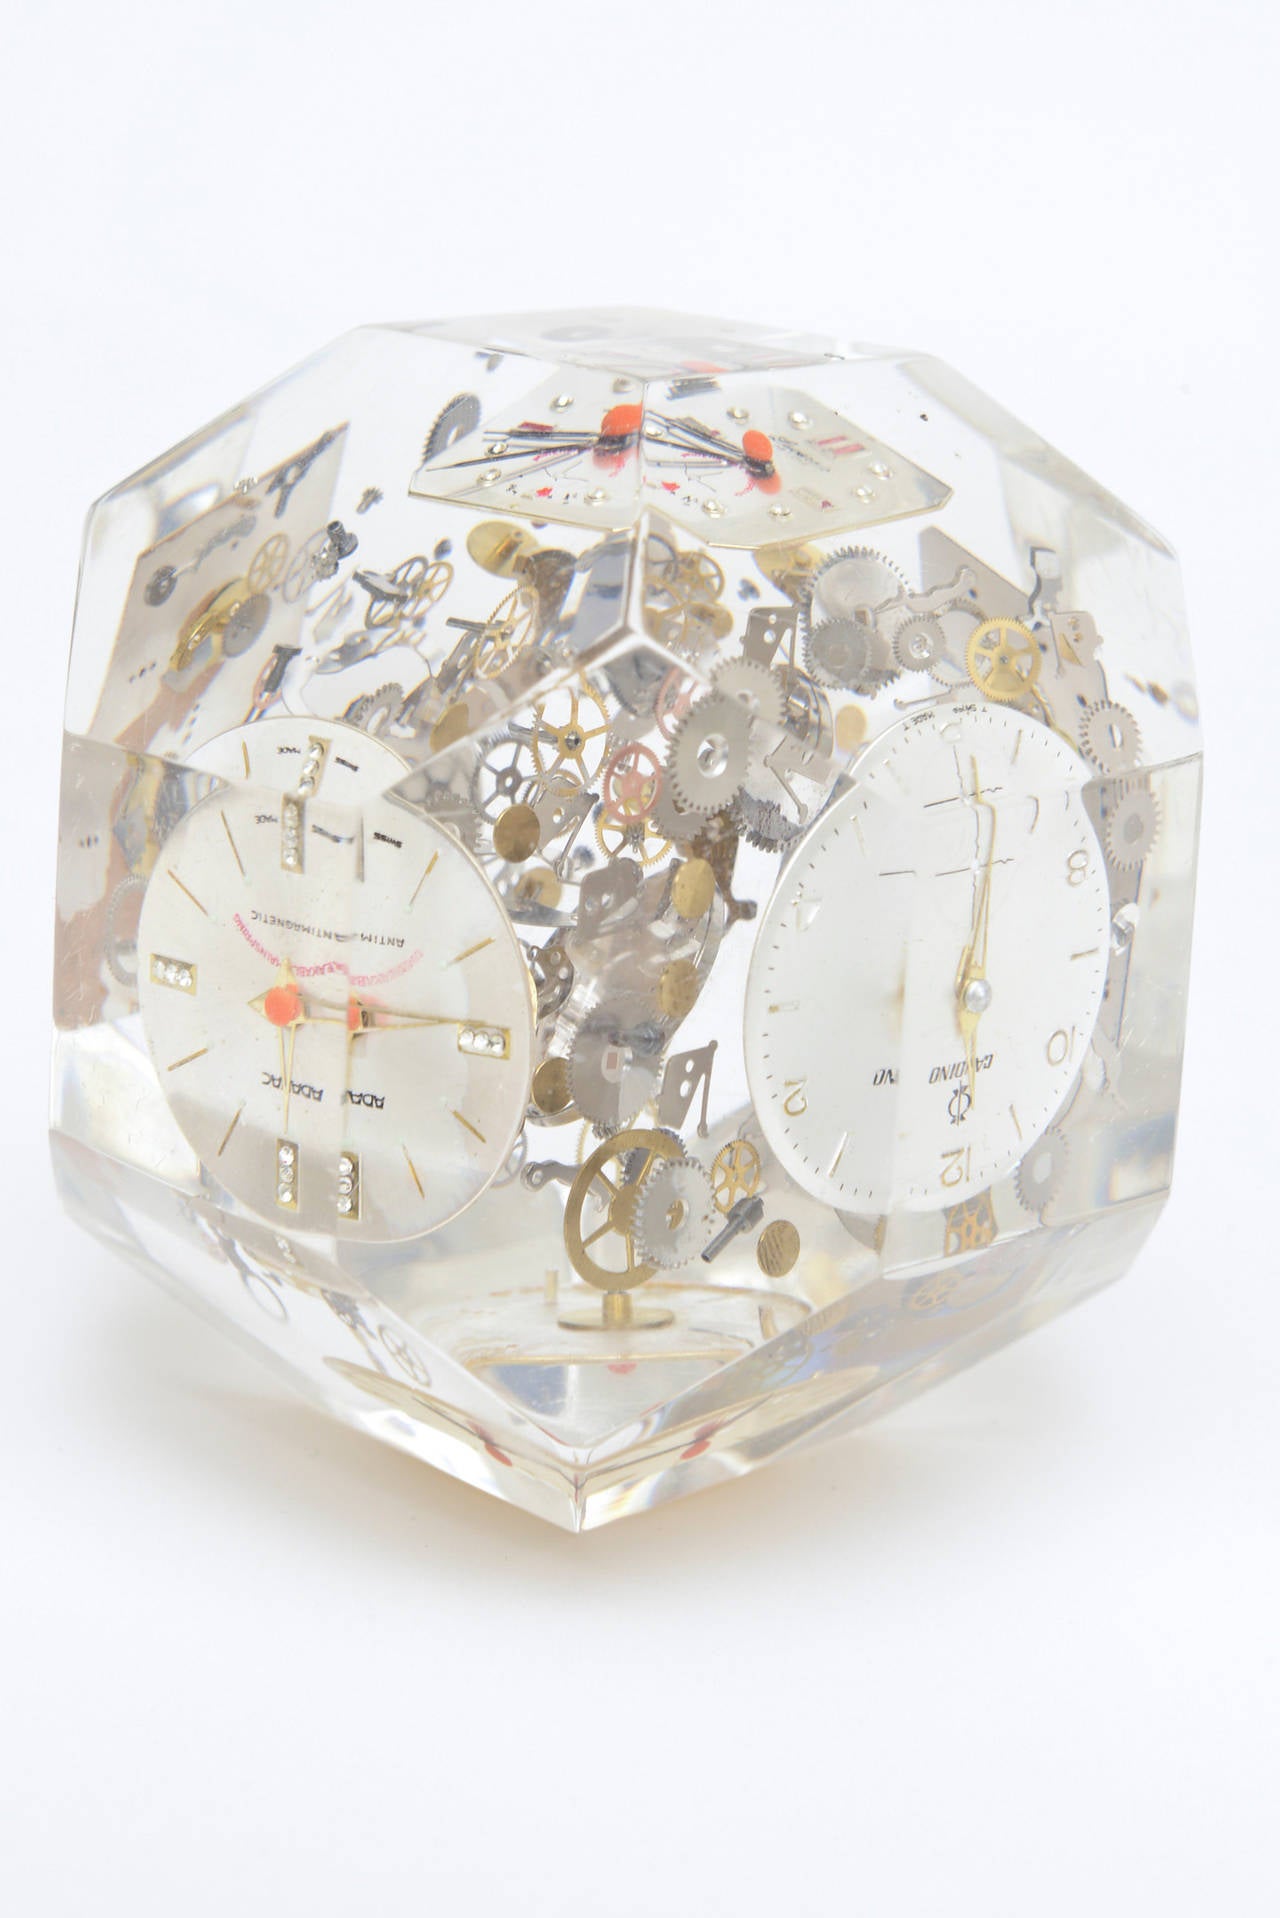 Late 20th Century Arman Style Clock and Watch Parts Lucite Faceted Paperweight Sculpture